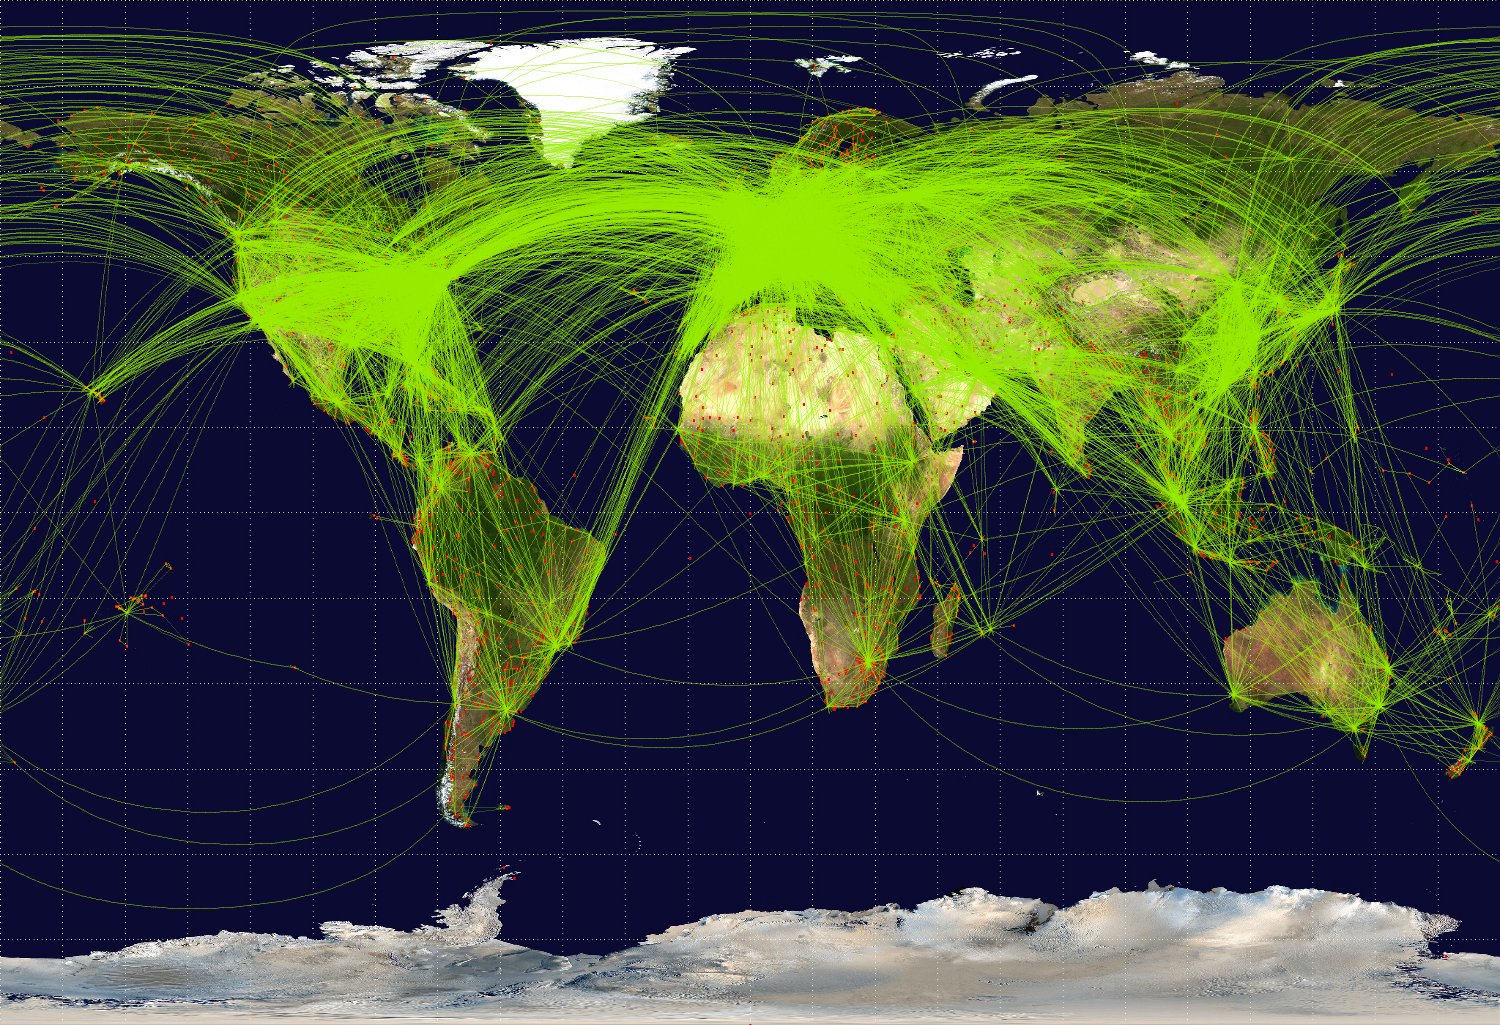 airline routes